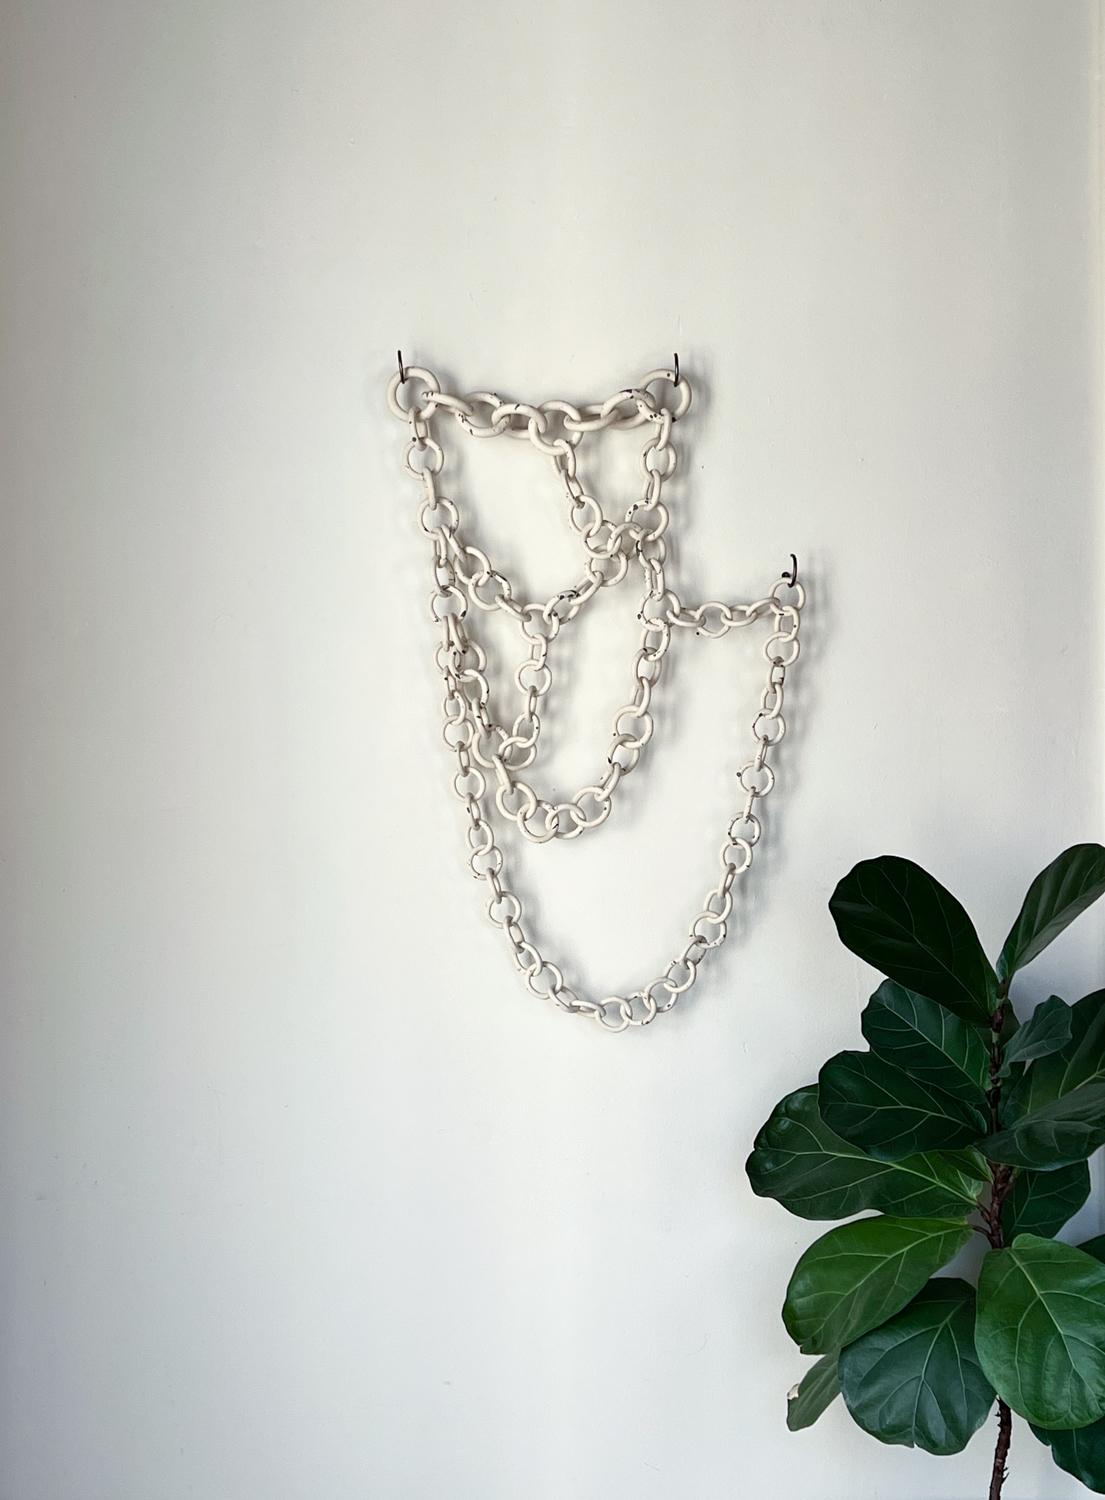 Hand-Crafted white Ceramic Link Chain Wall Sculpture